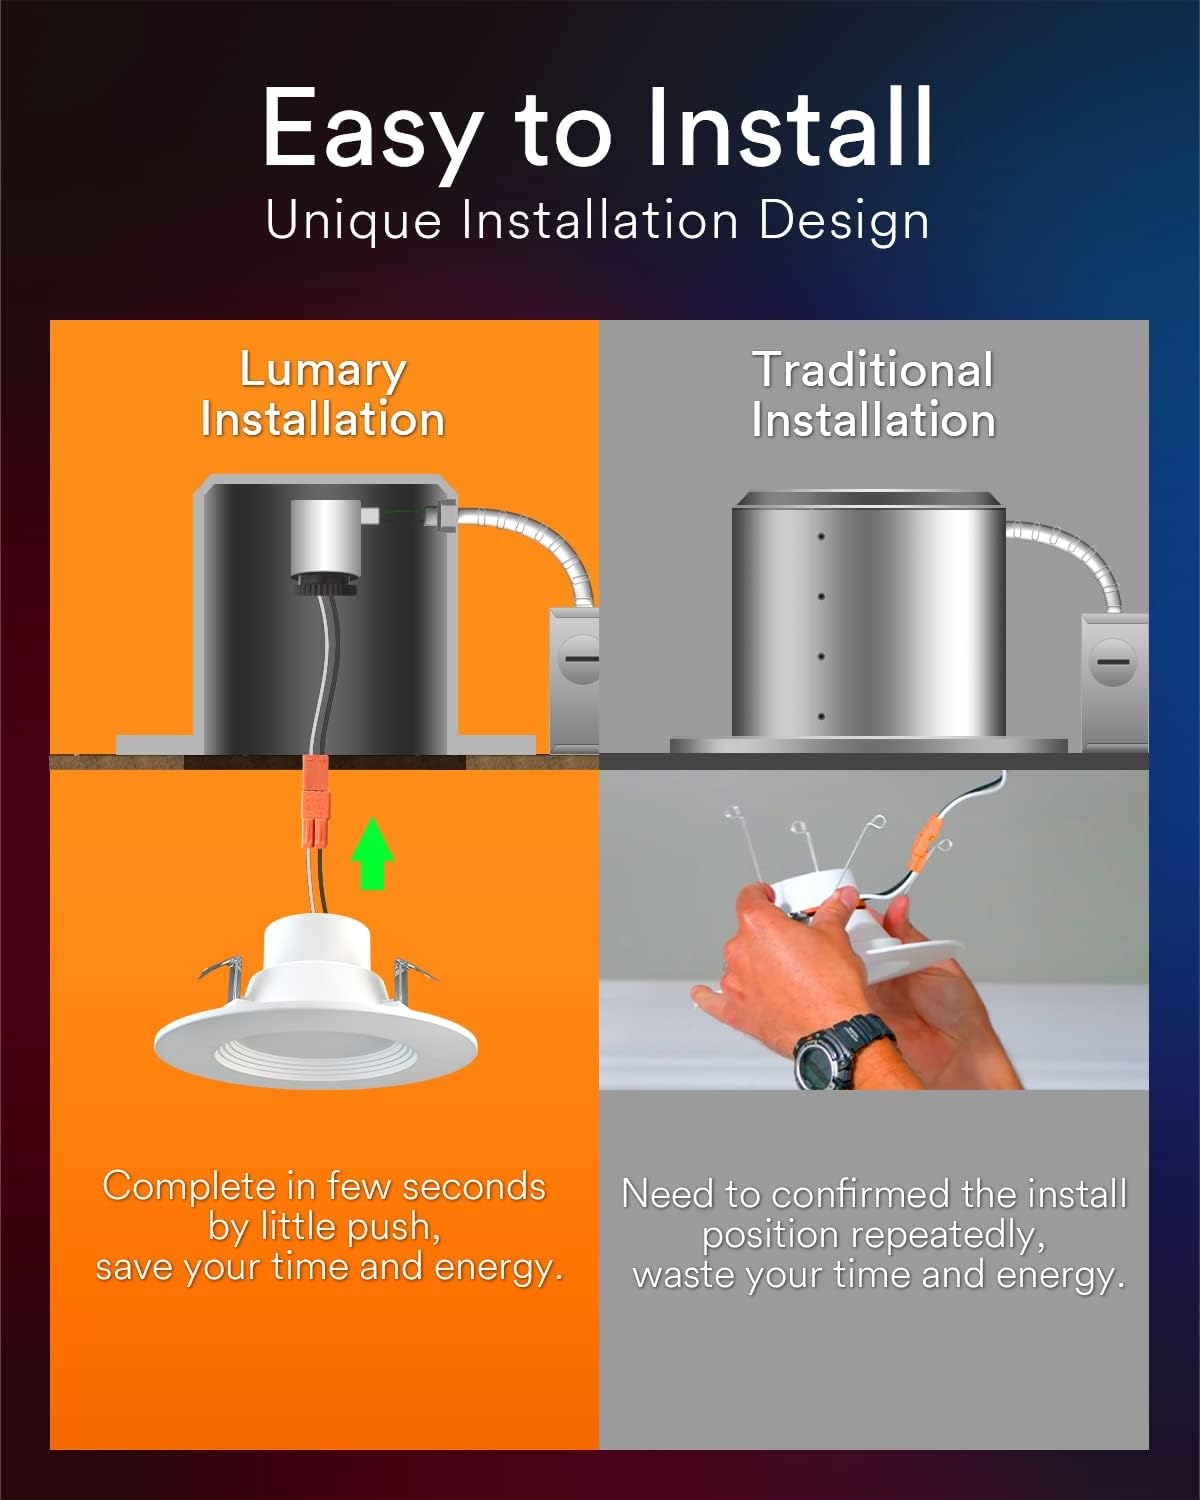 Experience the Ultimate Smart Lighting with Lumary Recessed Lighting 5/6 Inch Retrofit